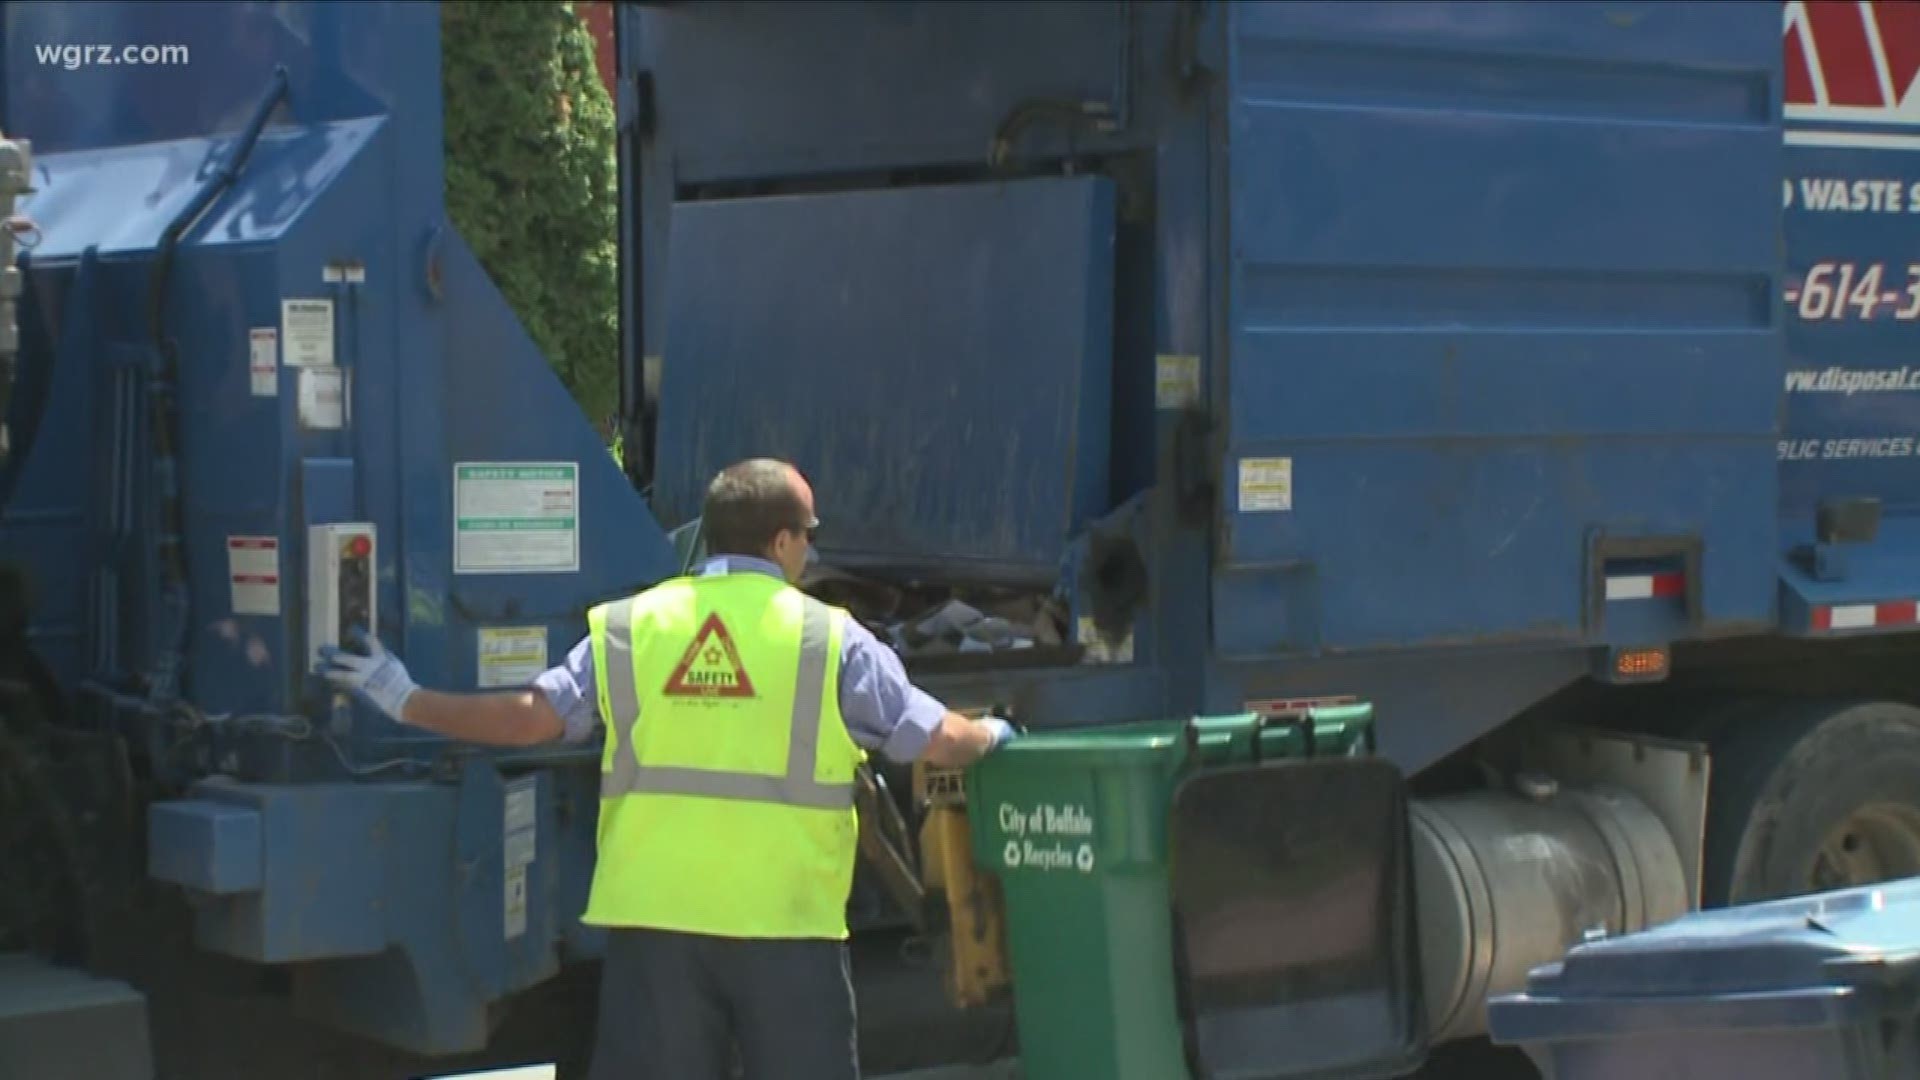 Meeting on Lancaster's new recycling program